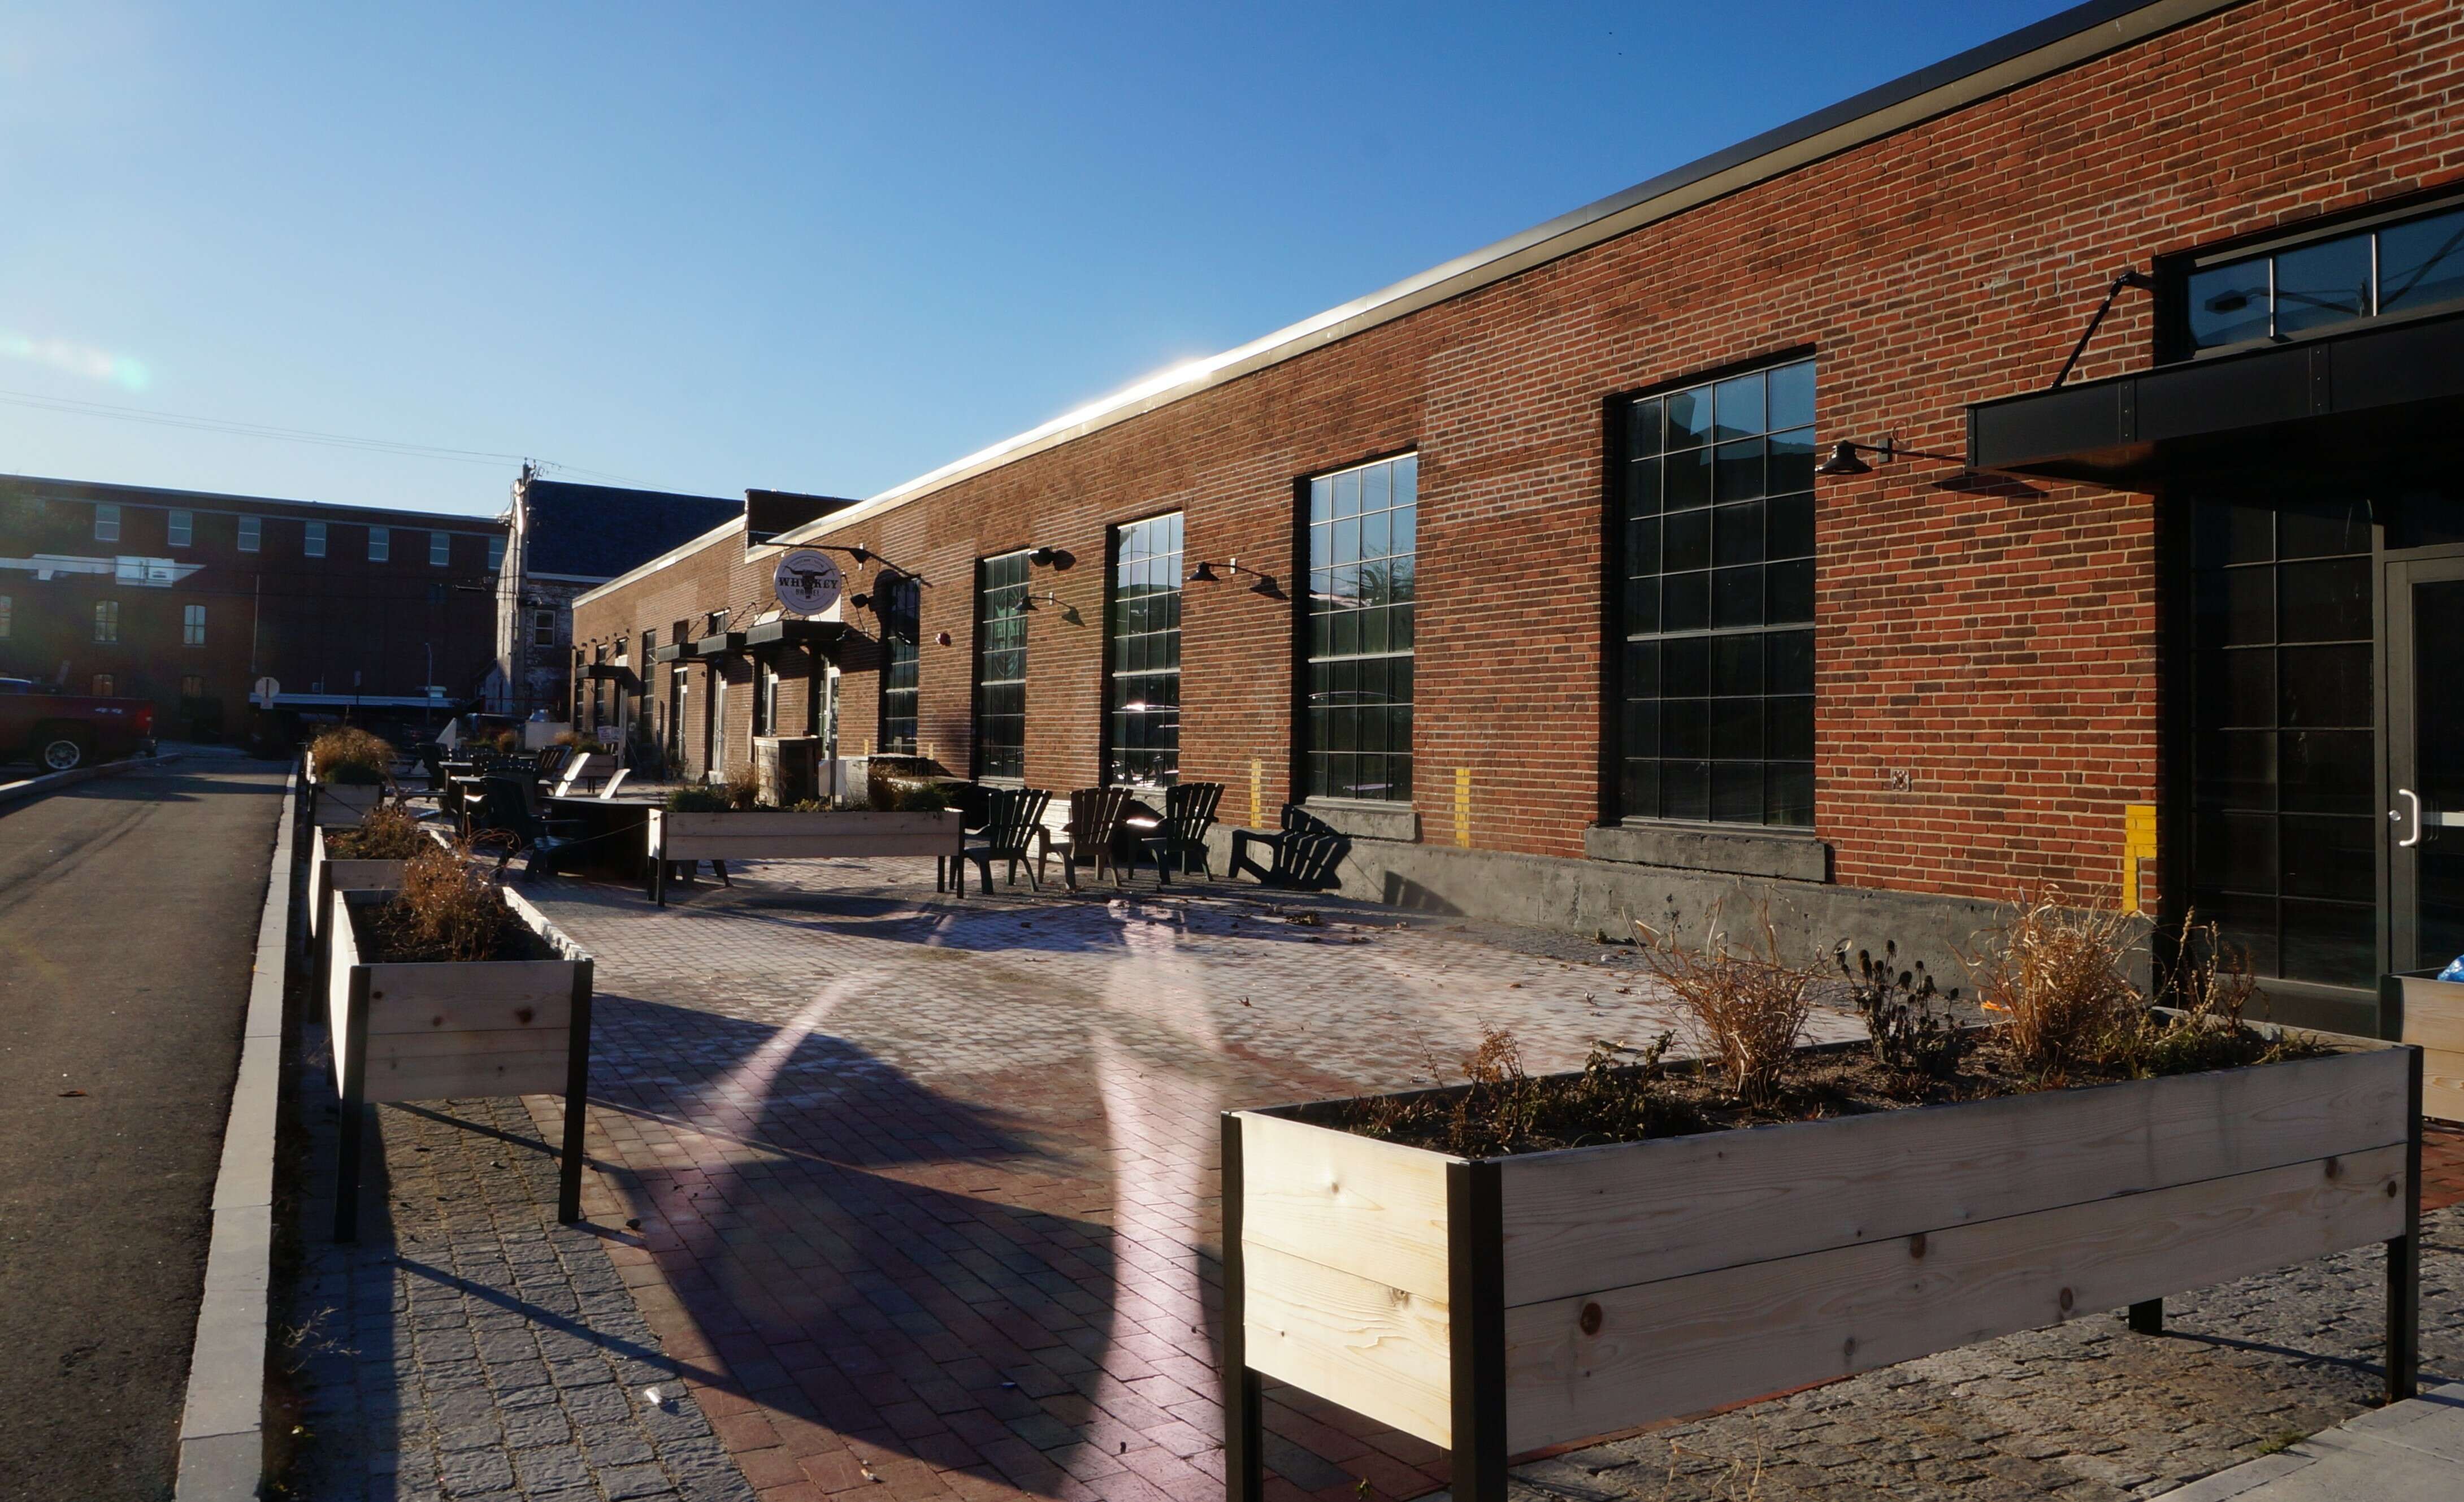 A long brick courtyard in front of a low brick industrial building with lots of big windows